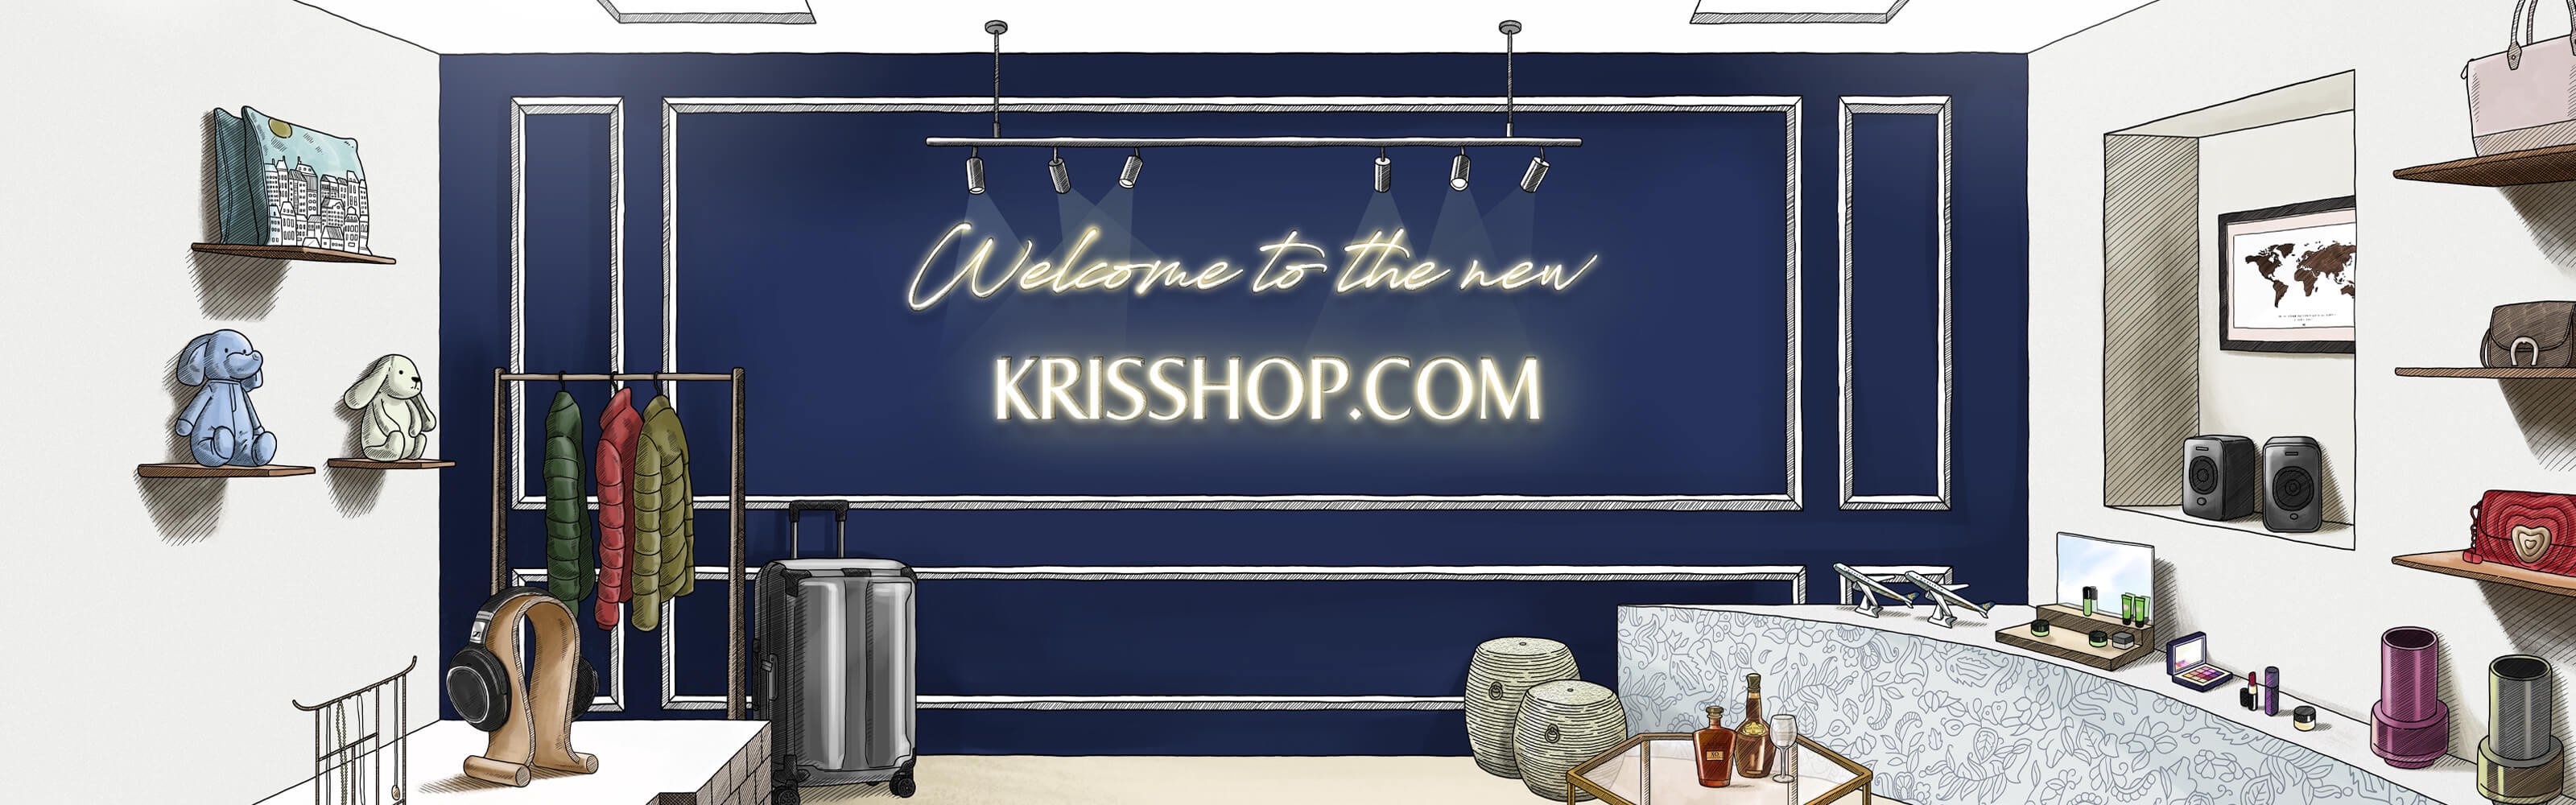 Welcome to KrisShop